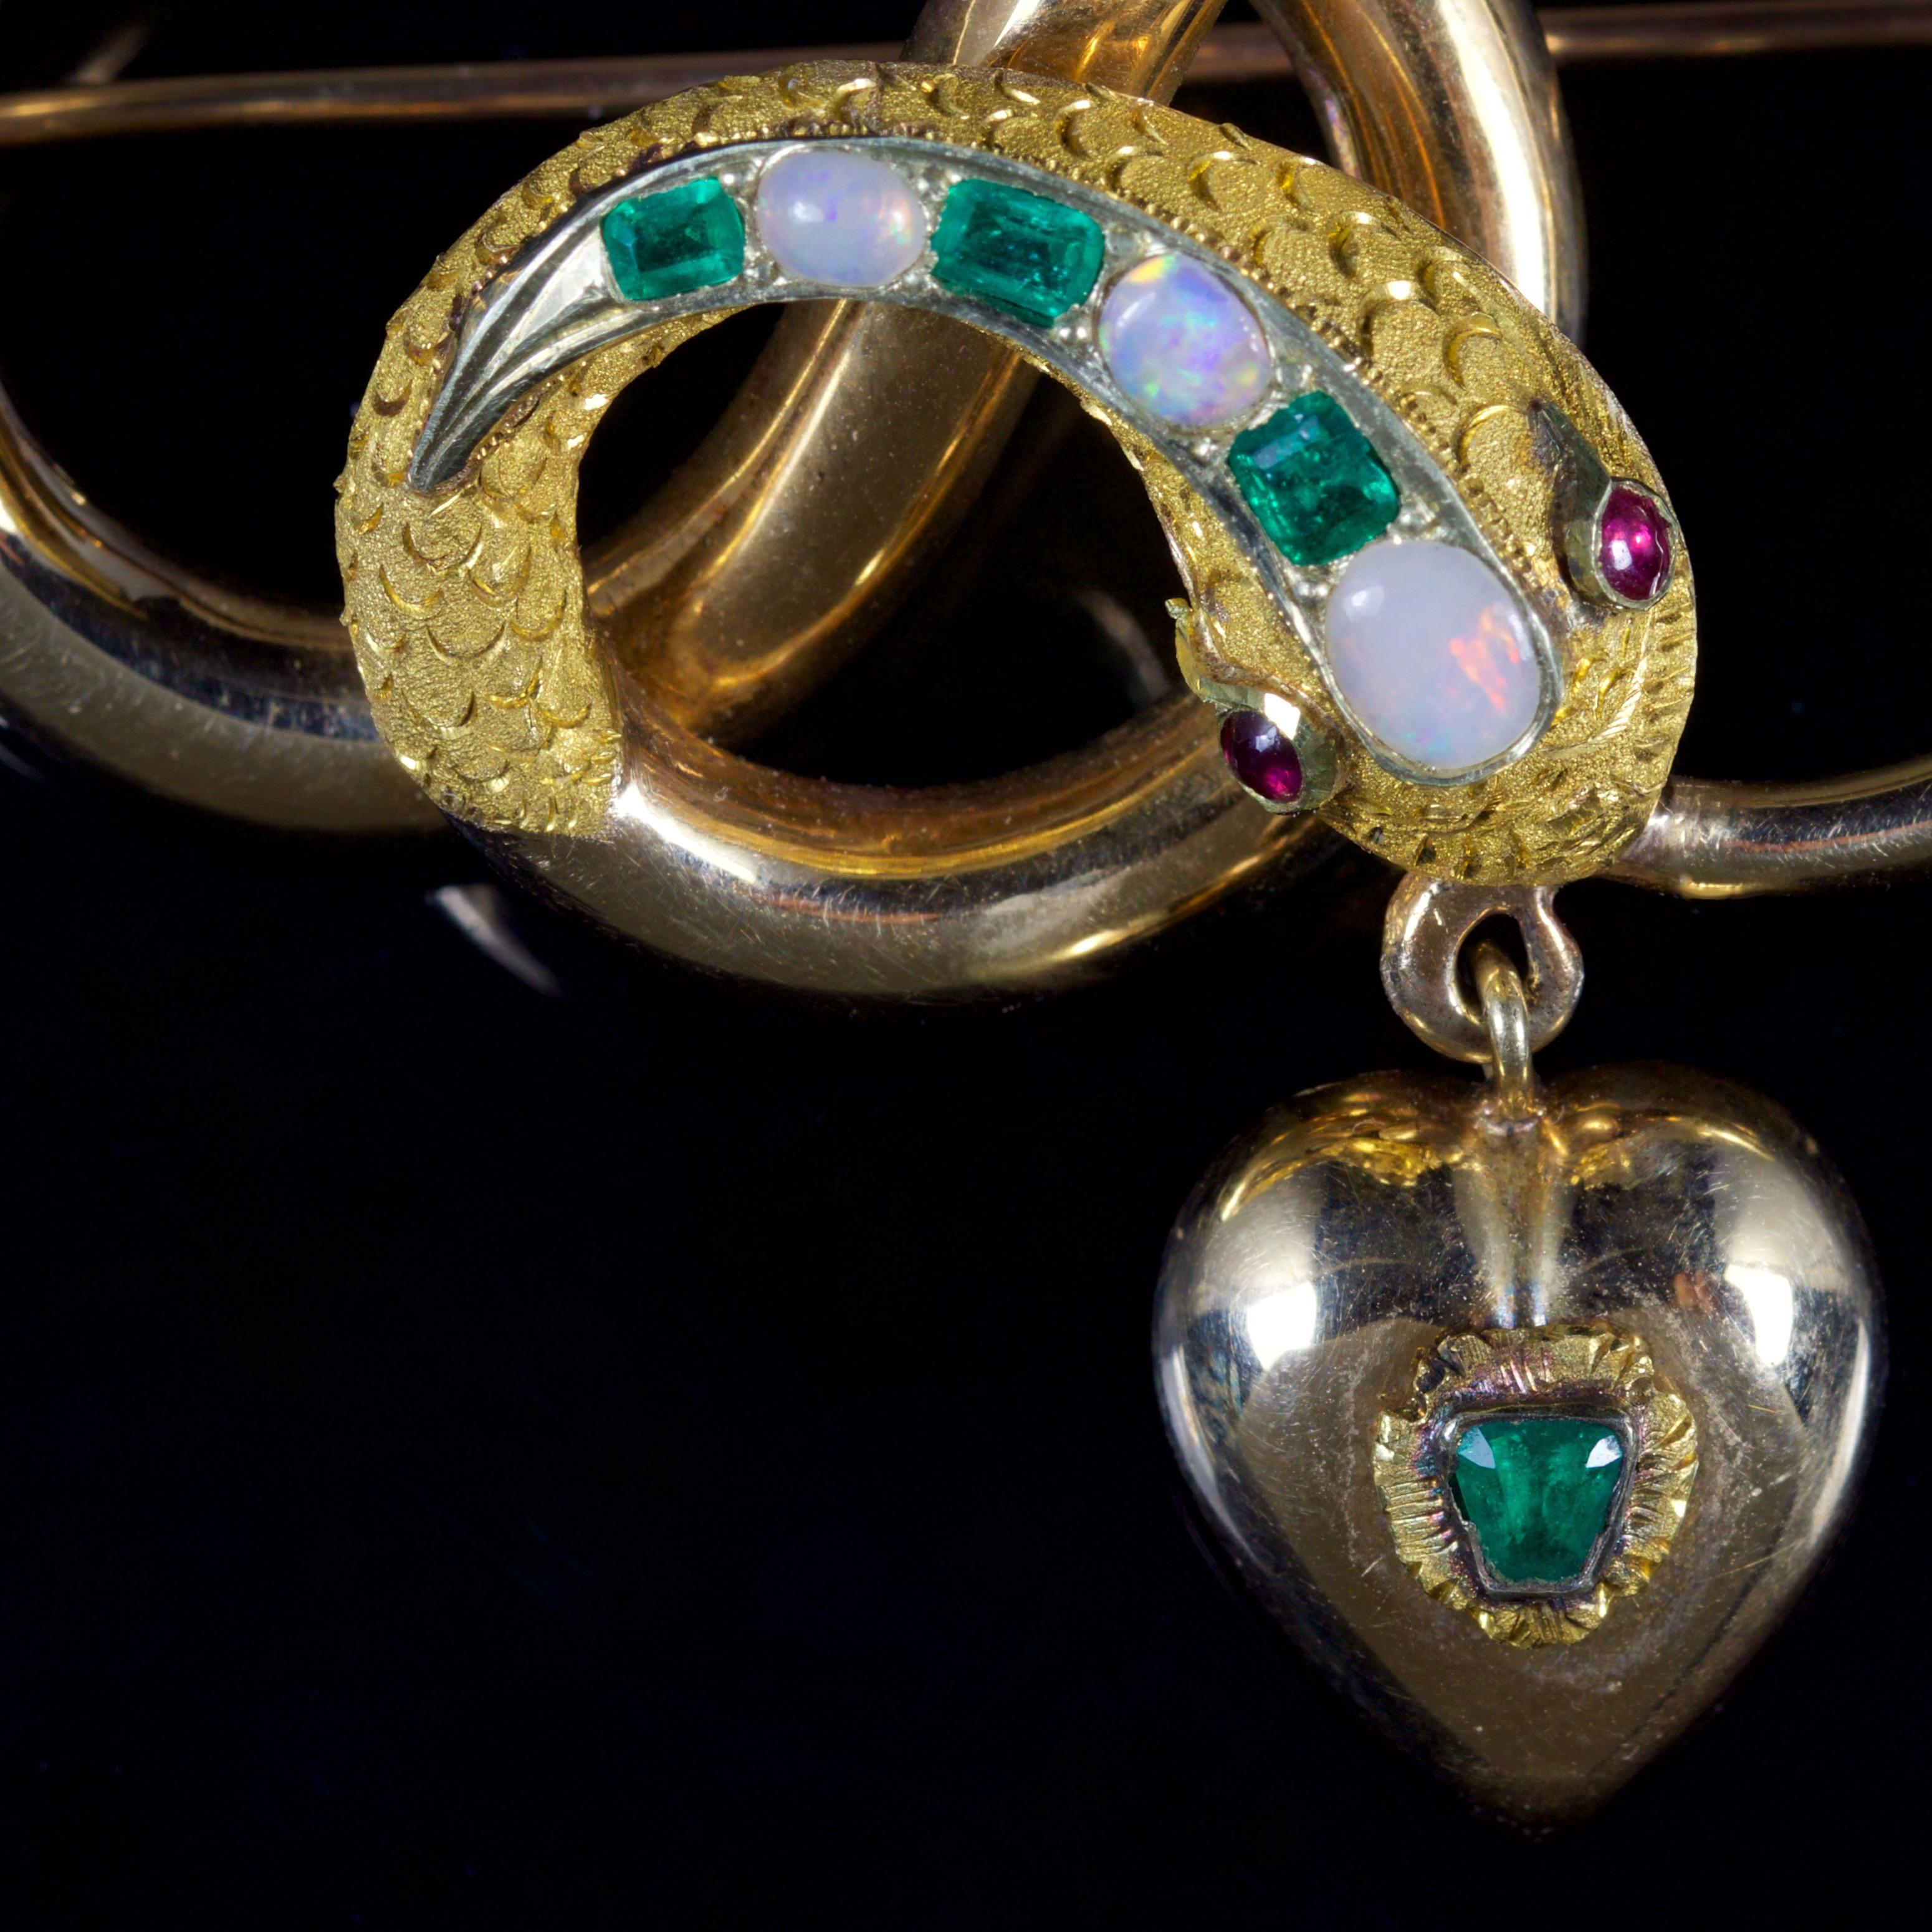 This fabulous antique Victorian 18ct Gold snake brooch is Circa 1860.

The wonderful brooch depicts a beautifully engraved 18ct Gold snake which is adorned with Emeralds, Opals and Rubies.

The Rubies are the snakes eyes, with the beautiful Emeralds